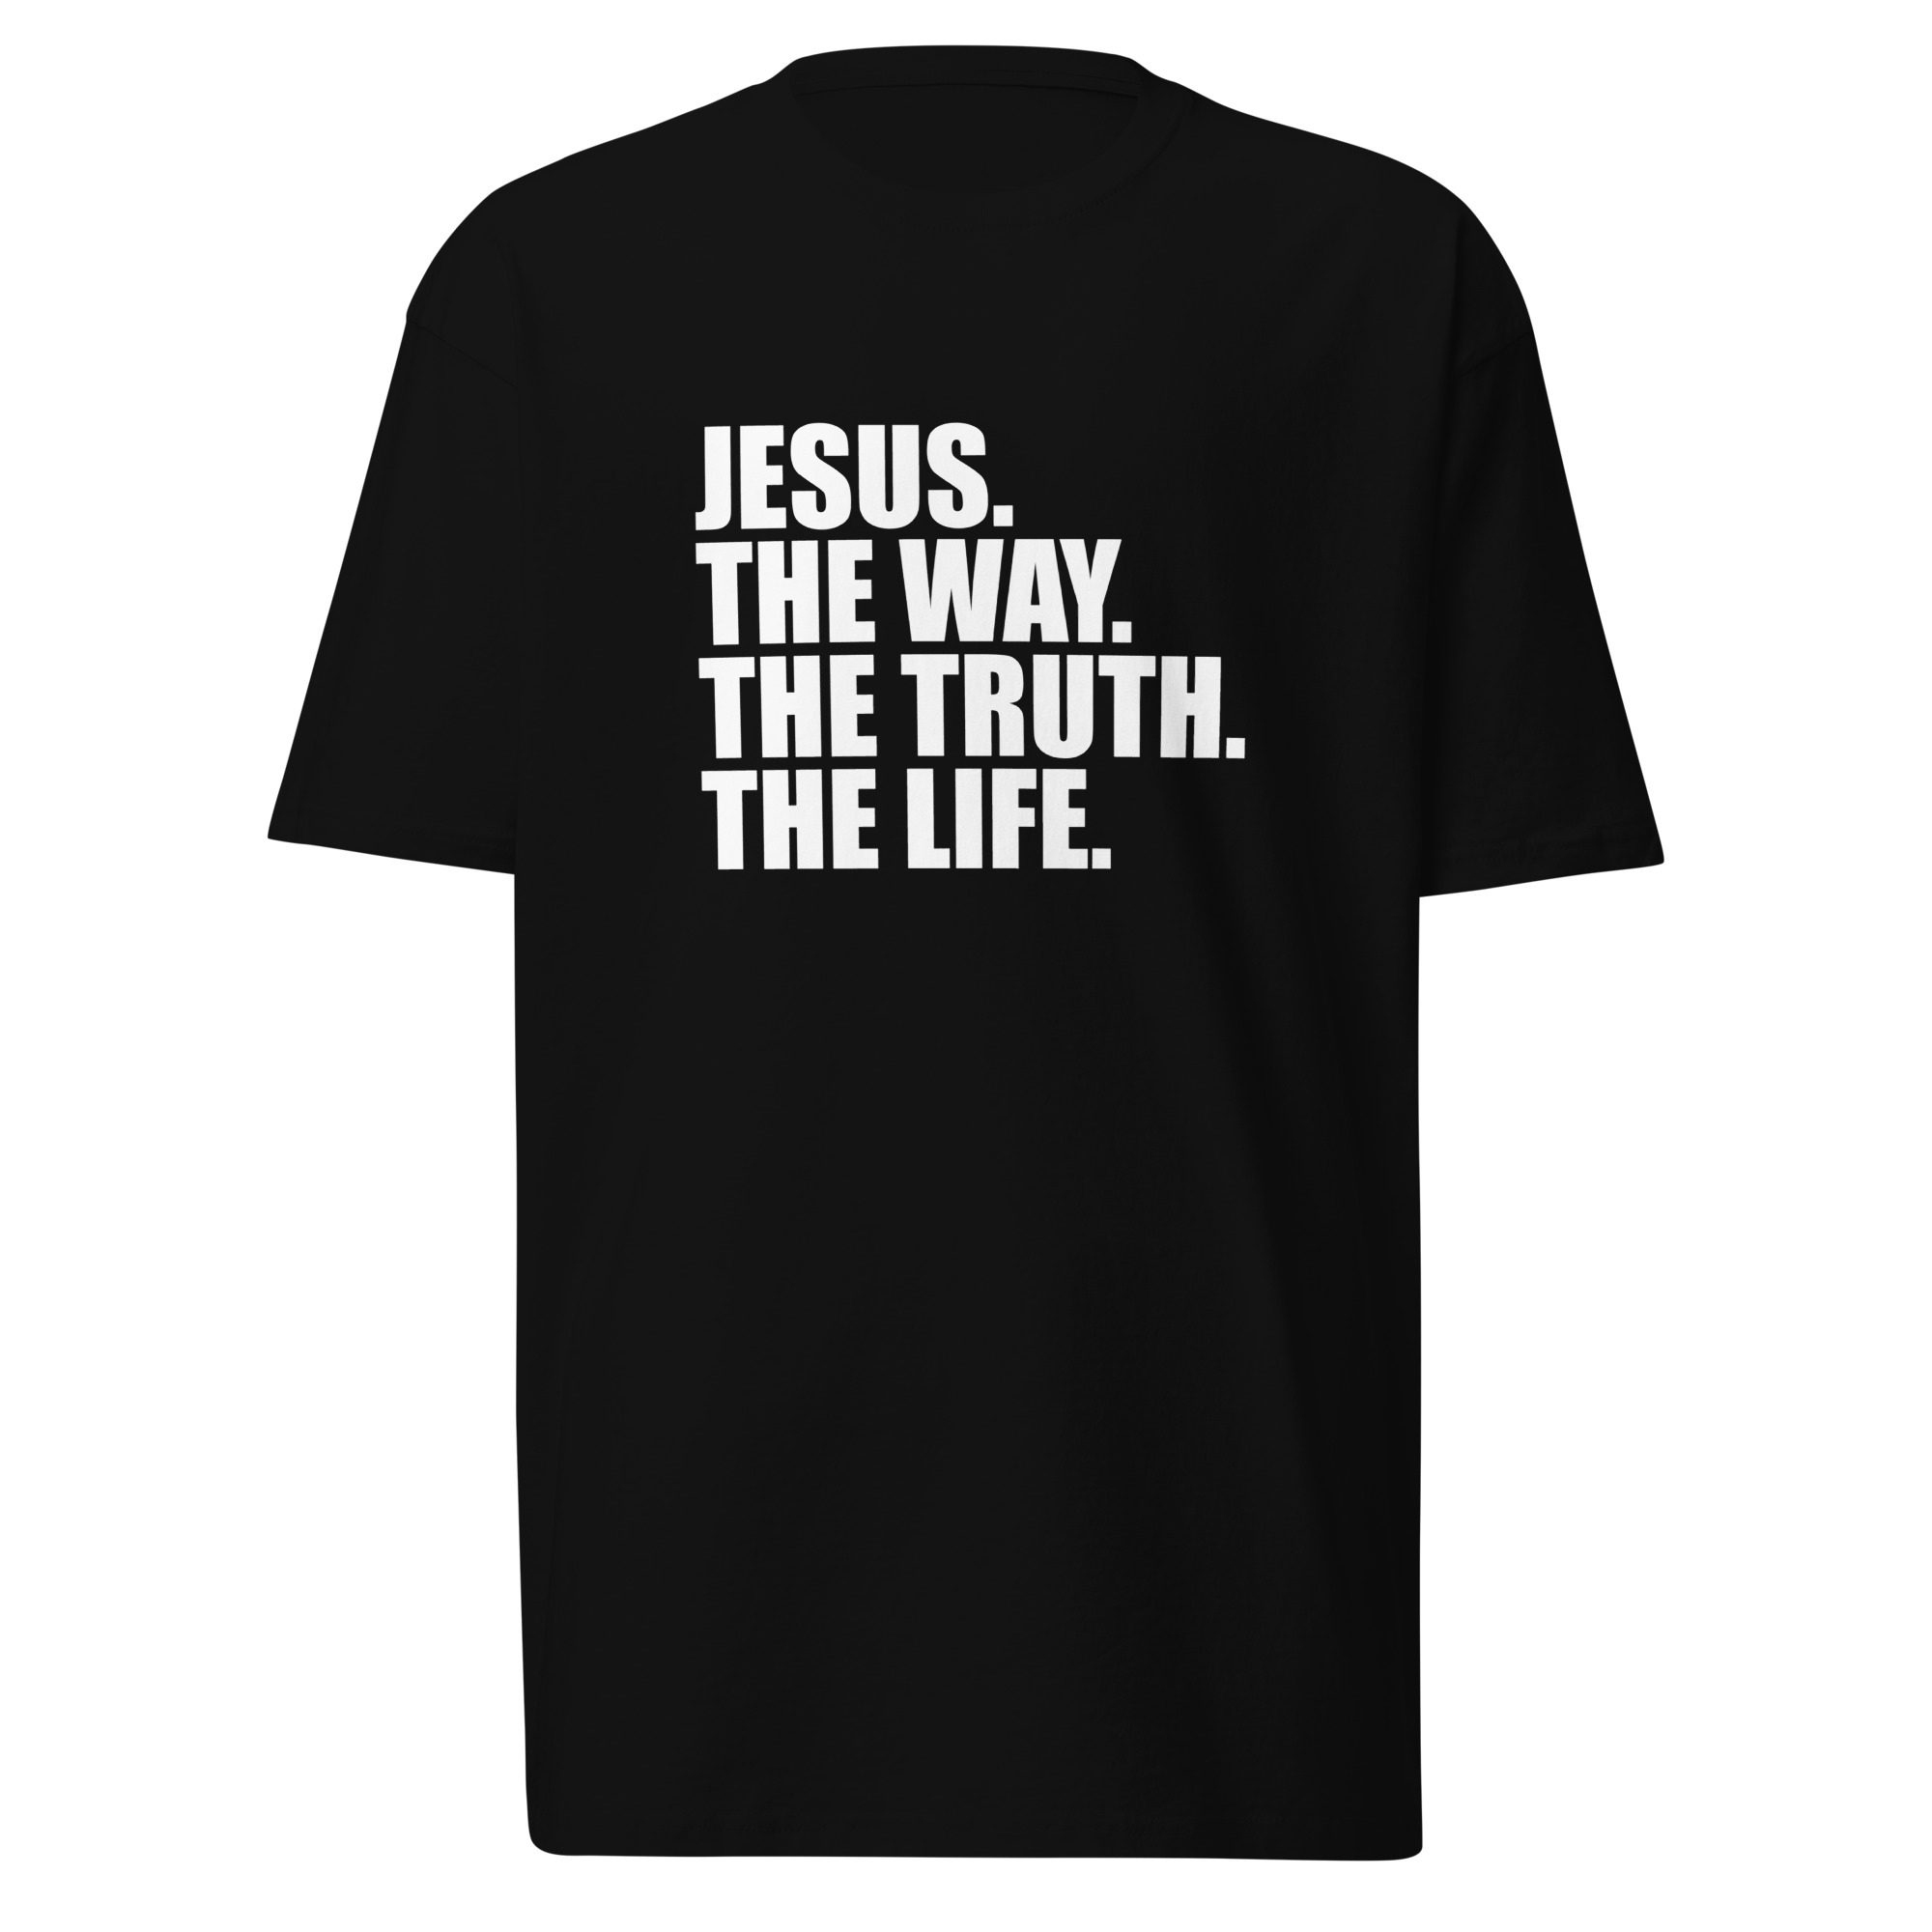 The Way. The Truth. The Life. T-Shirt - Black / M